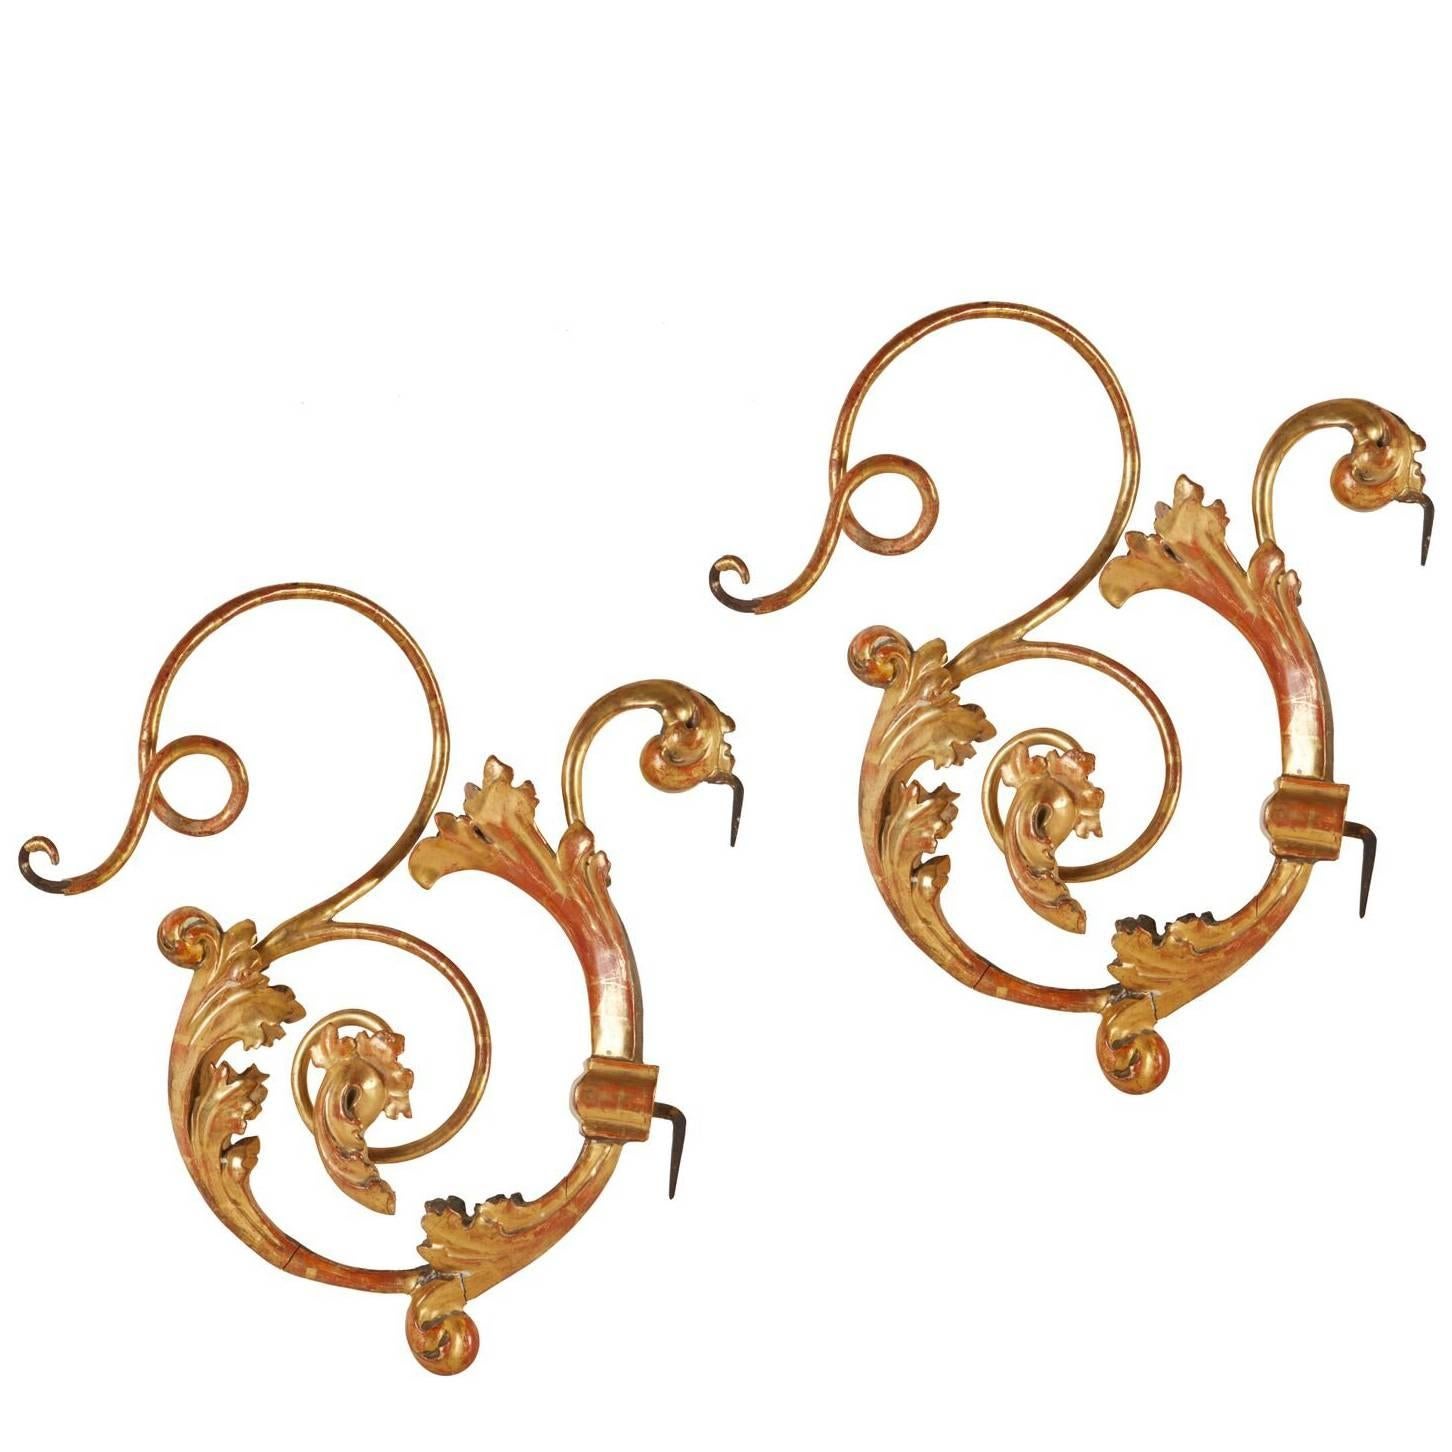 Rare and Elegant 18th Century Gilt Metal and Wood Brackets For Sale